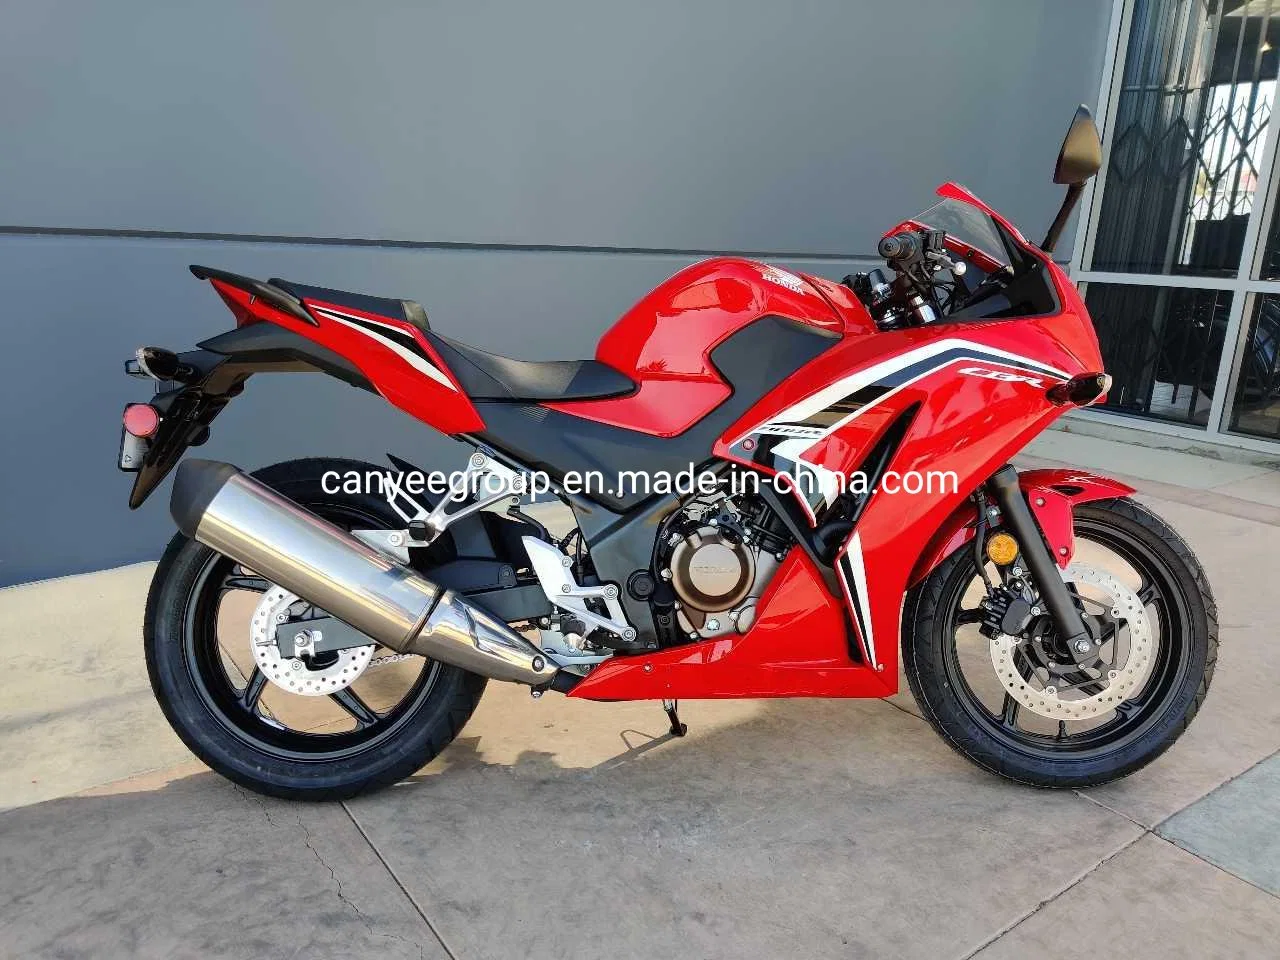 Cheap Brand New Cbr300r ABS Motorcycle